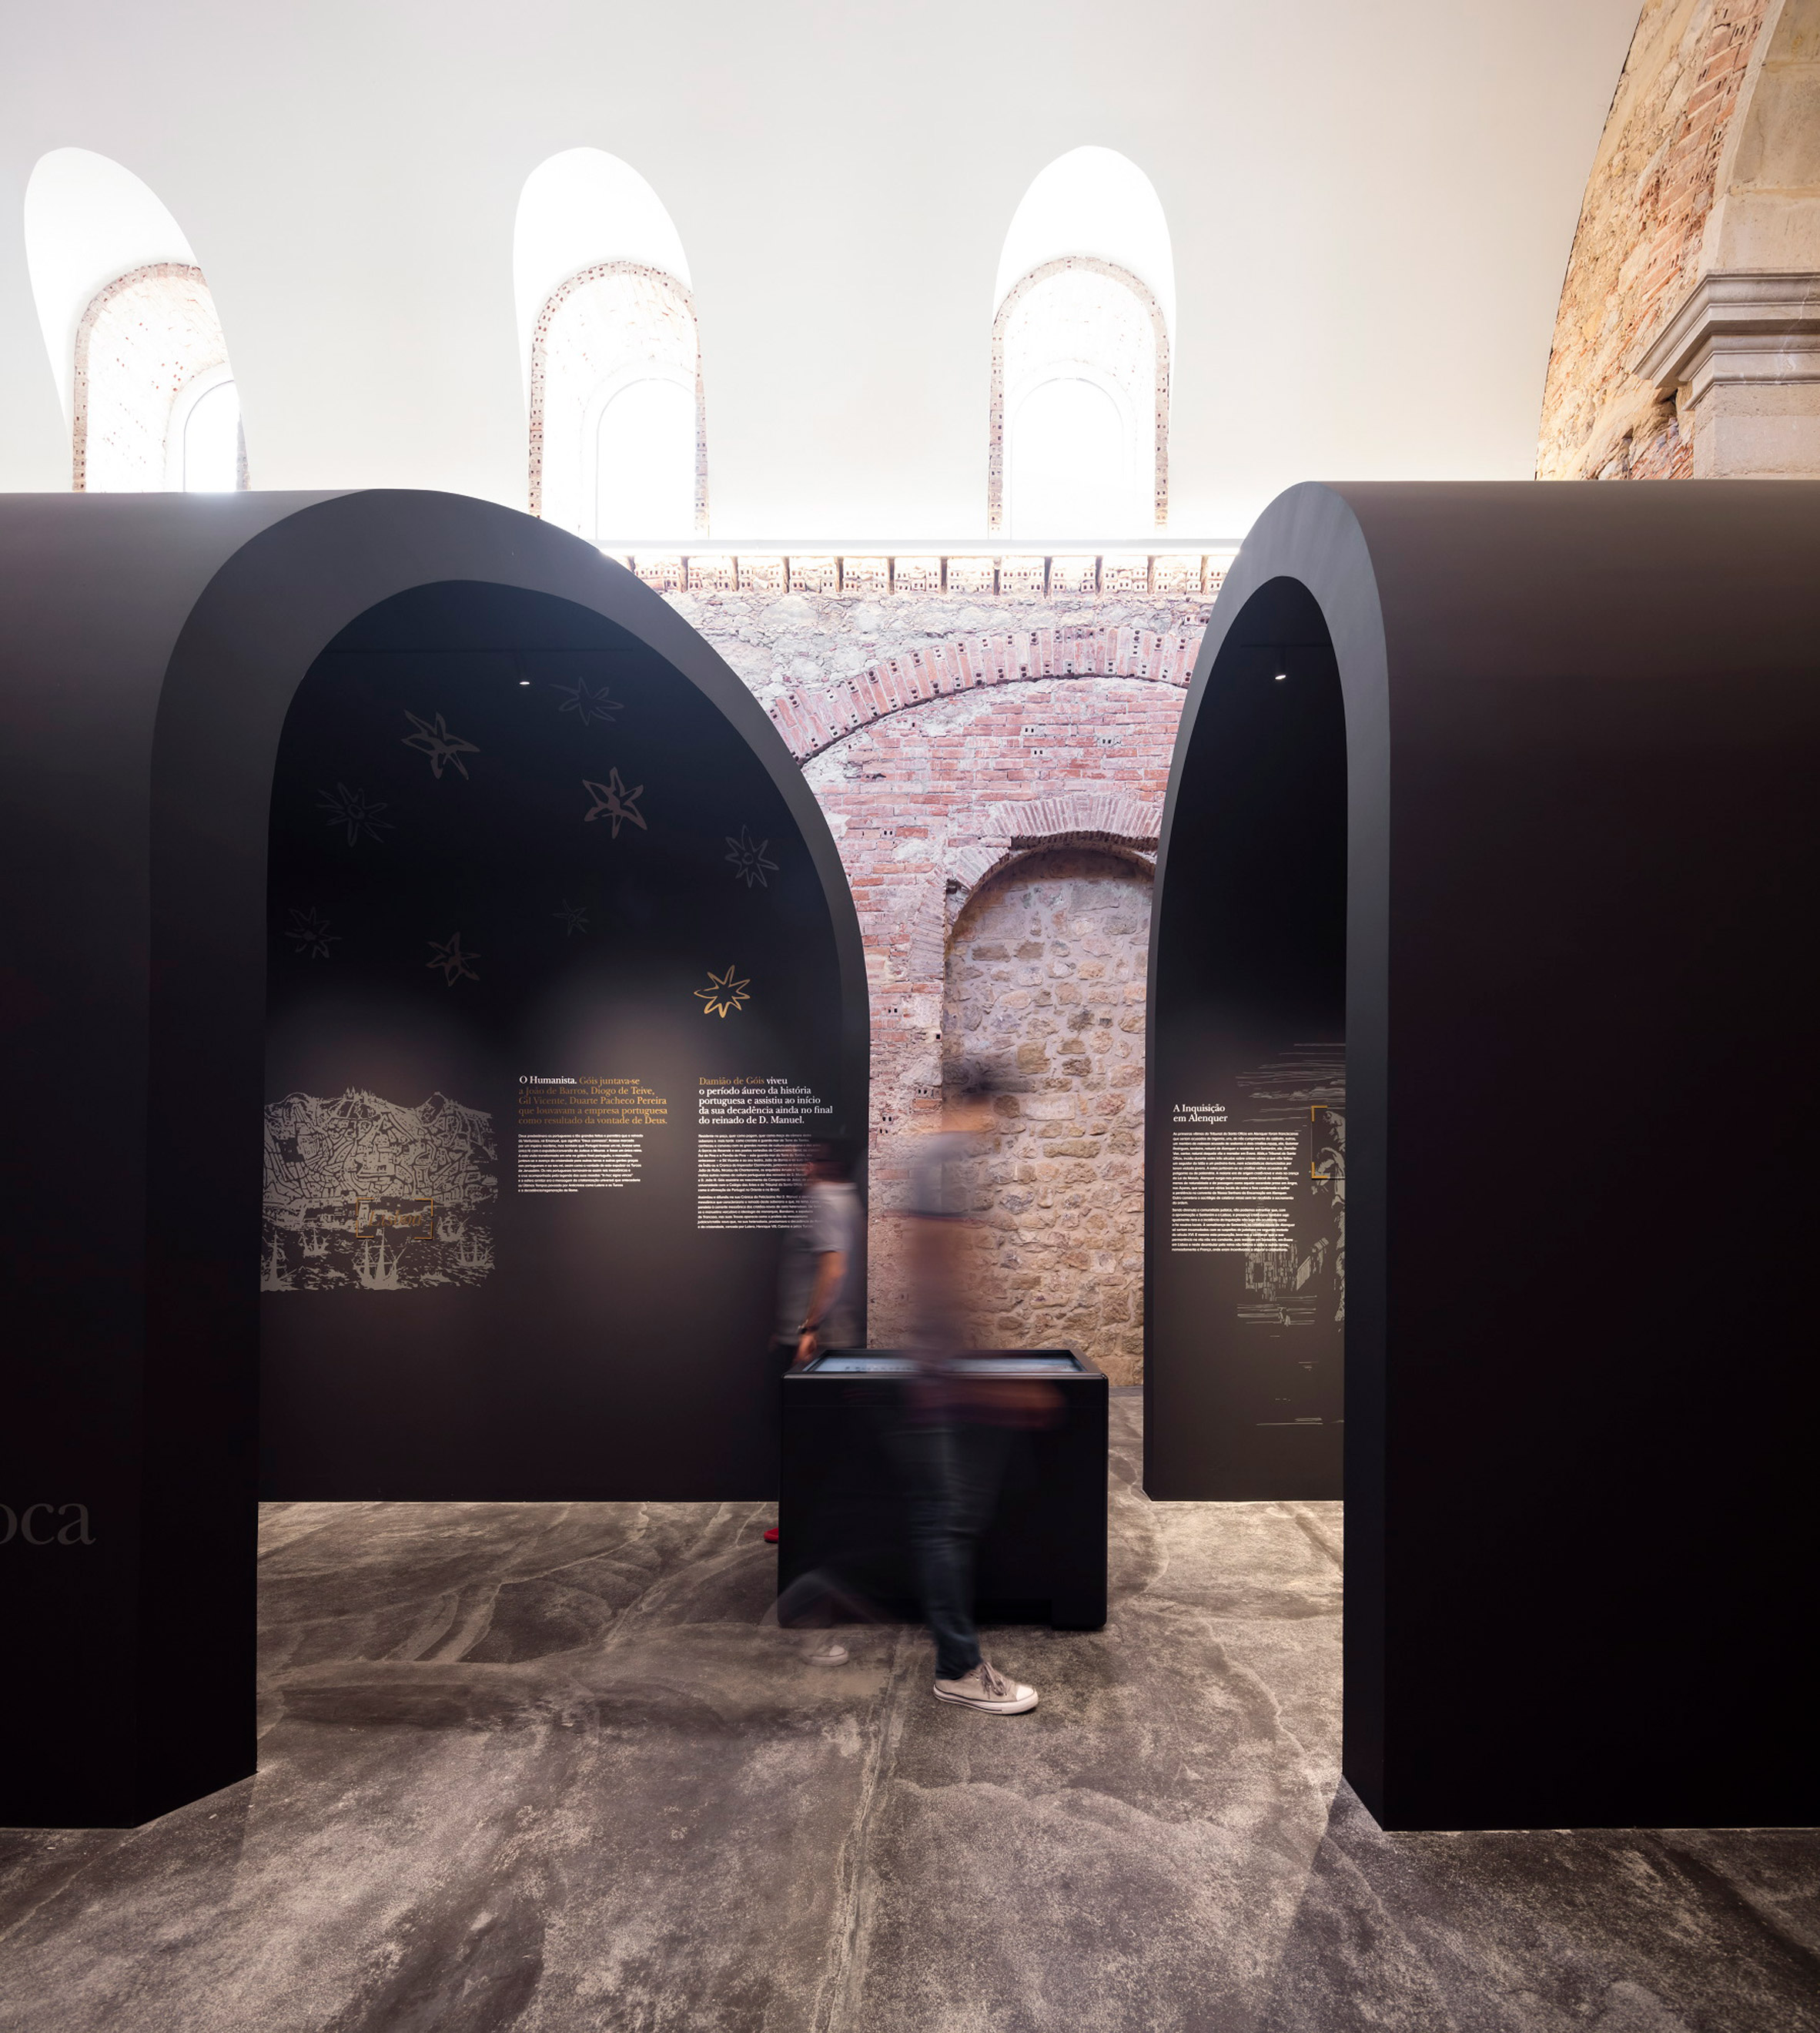 This restored church in Alenquer, central Portugal has been repurposed by Spaceworkers to include an arched exhibition space that commemorates the life and historical legacy of Portuguese philosopher and scholar Damião de Gois.